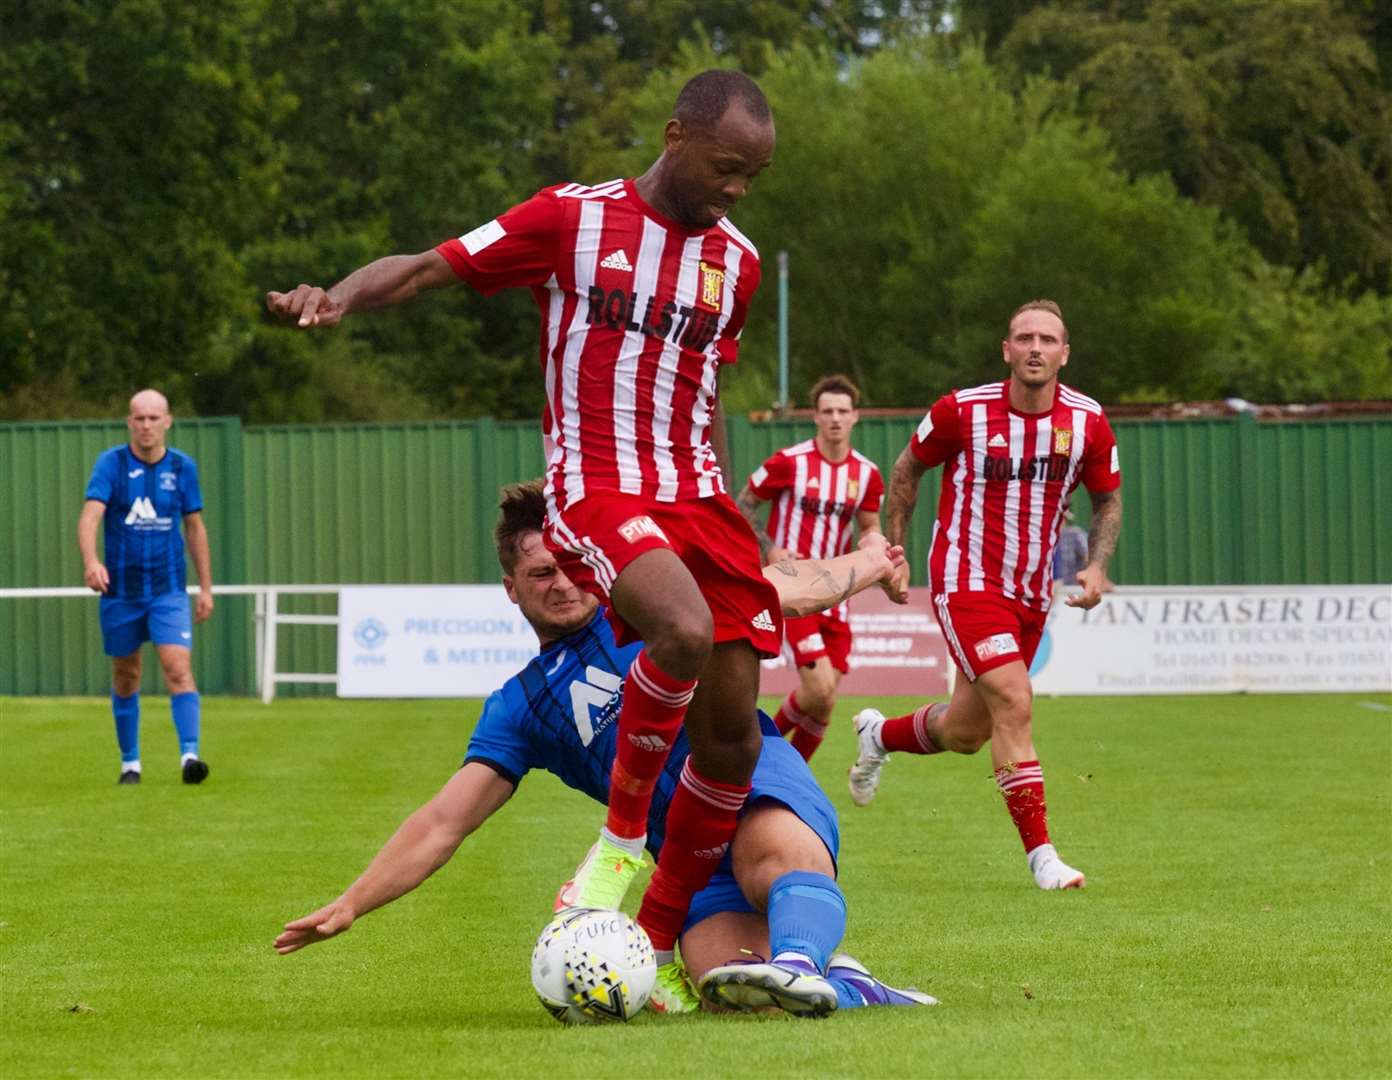 Julian Wade scored two goals in Formartine's win against Strathspey Thistle. Picture: Phil Harman